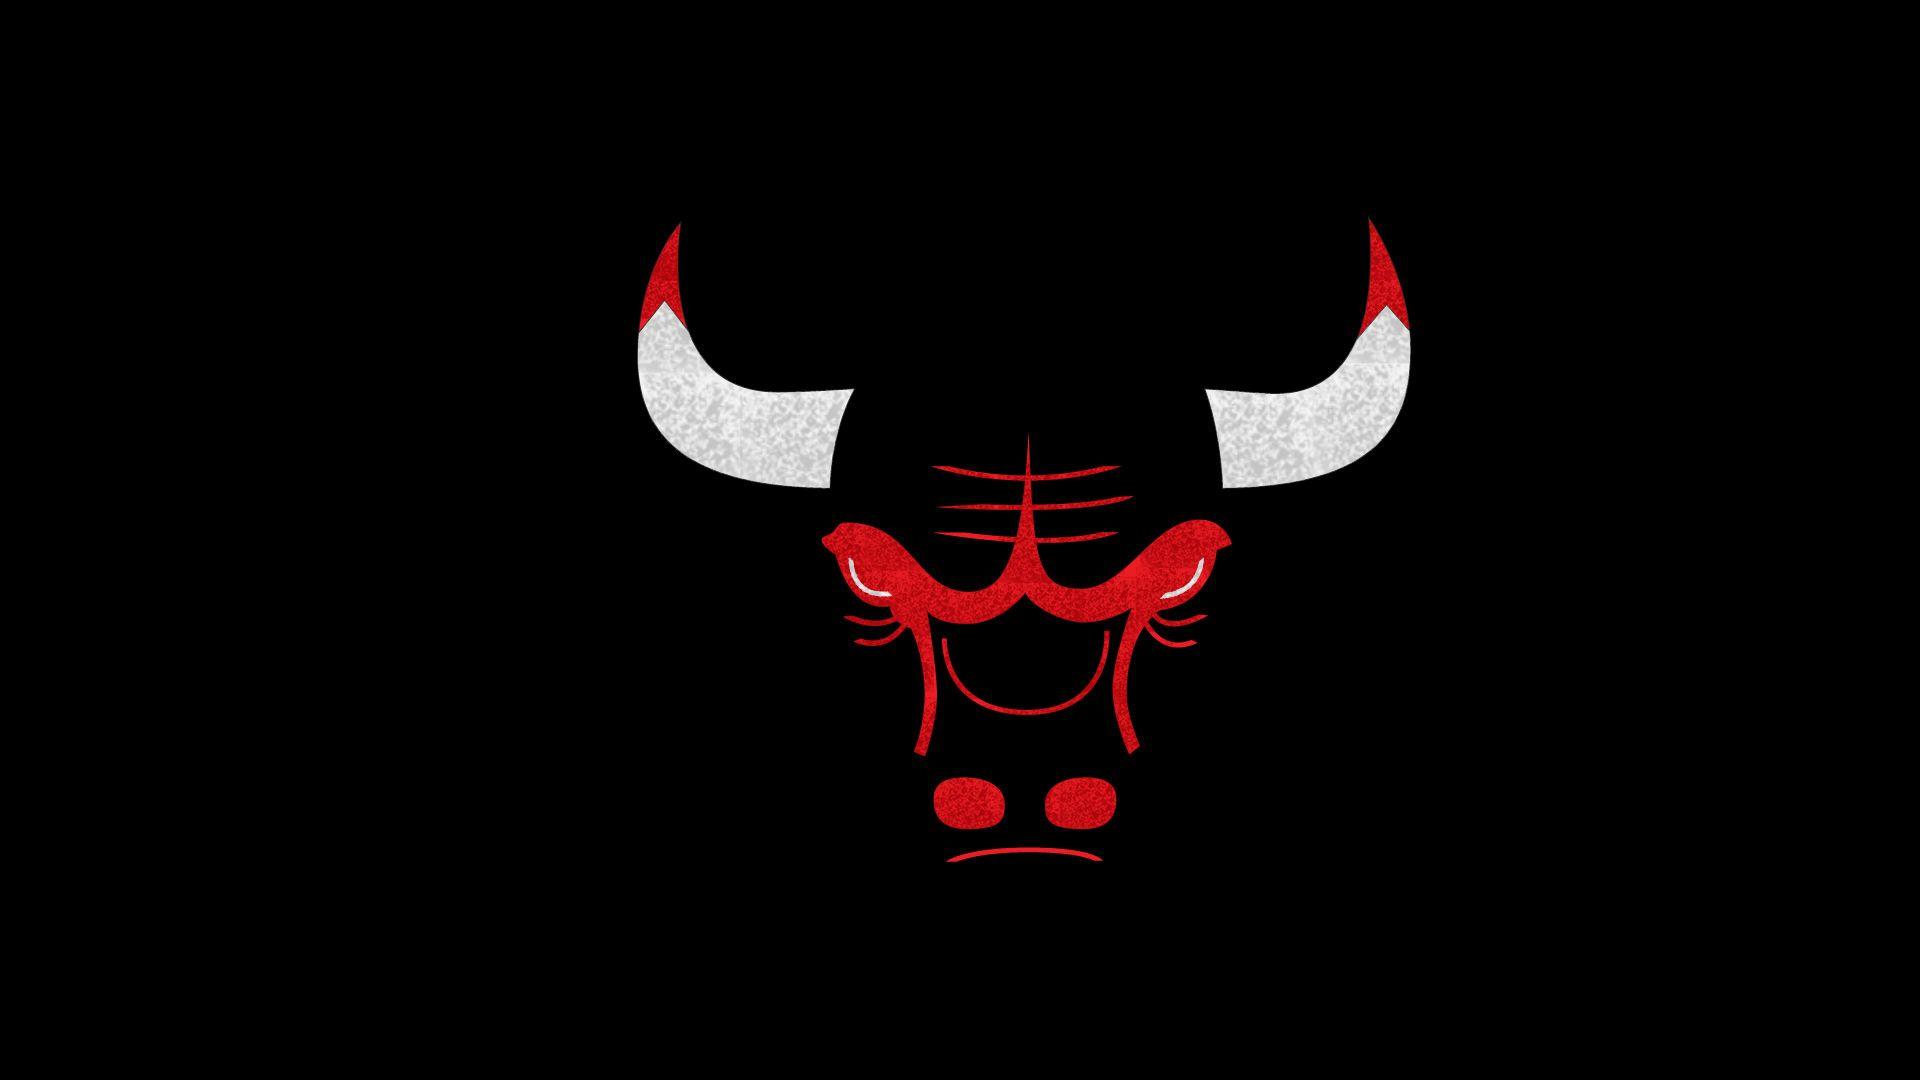 Chicago Bulls Wallpapers Hd 24282 Image